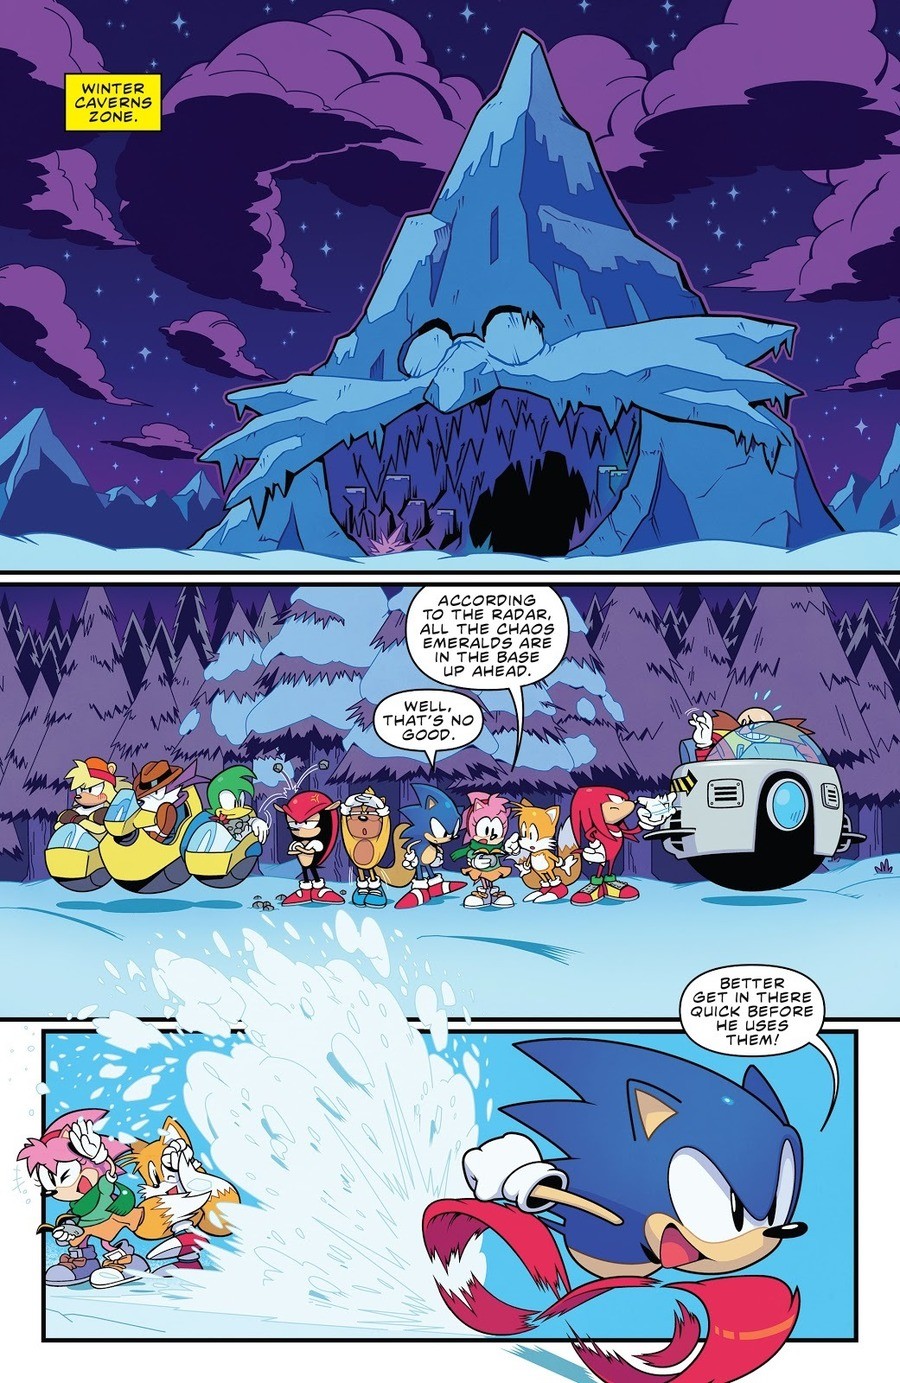 Sonic IDW 30th Anniversary Comic! (Part 2). Hey look! He said the thing! But yes, this is part two, check for part 1 in the IDW or Sonic Posting mention history